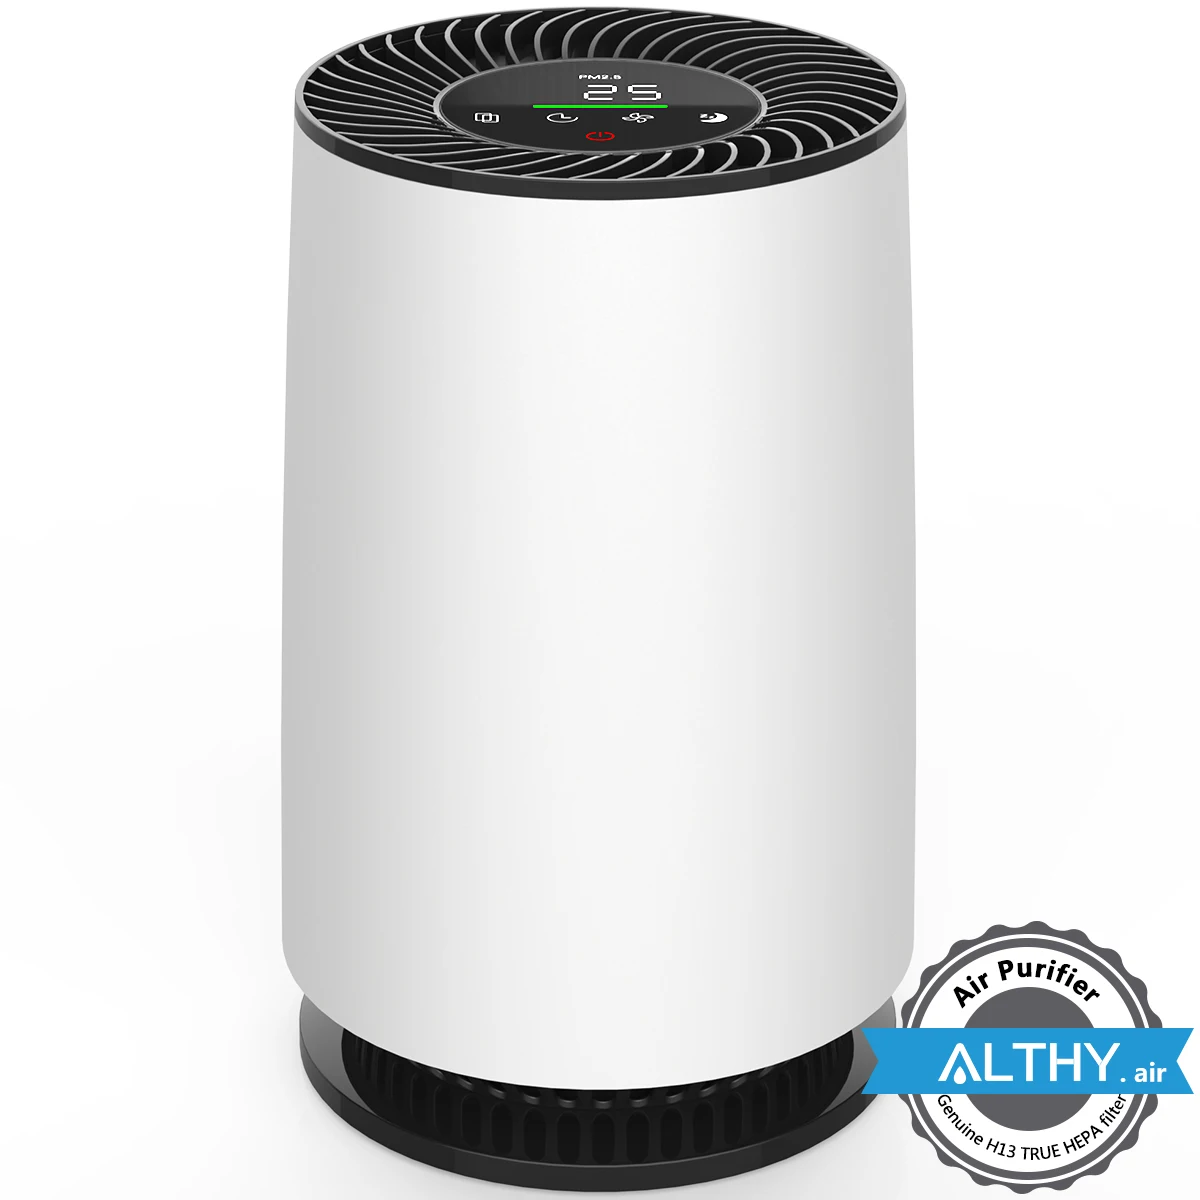 ALTHY A12 Air Purifier Air Cleaner H13 TRUE HEPA Filter - Remove 99% Smoke Dust Mold Pollen odor for Home Allergies Pets Smoker